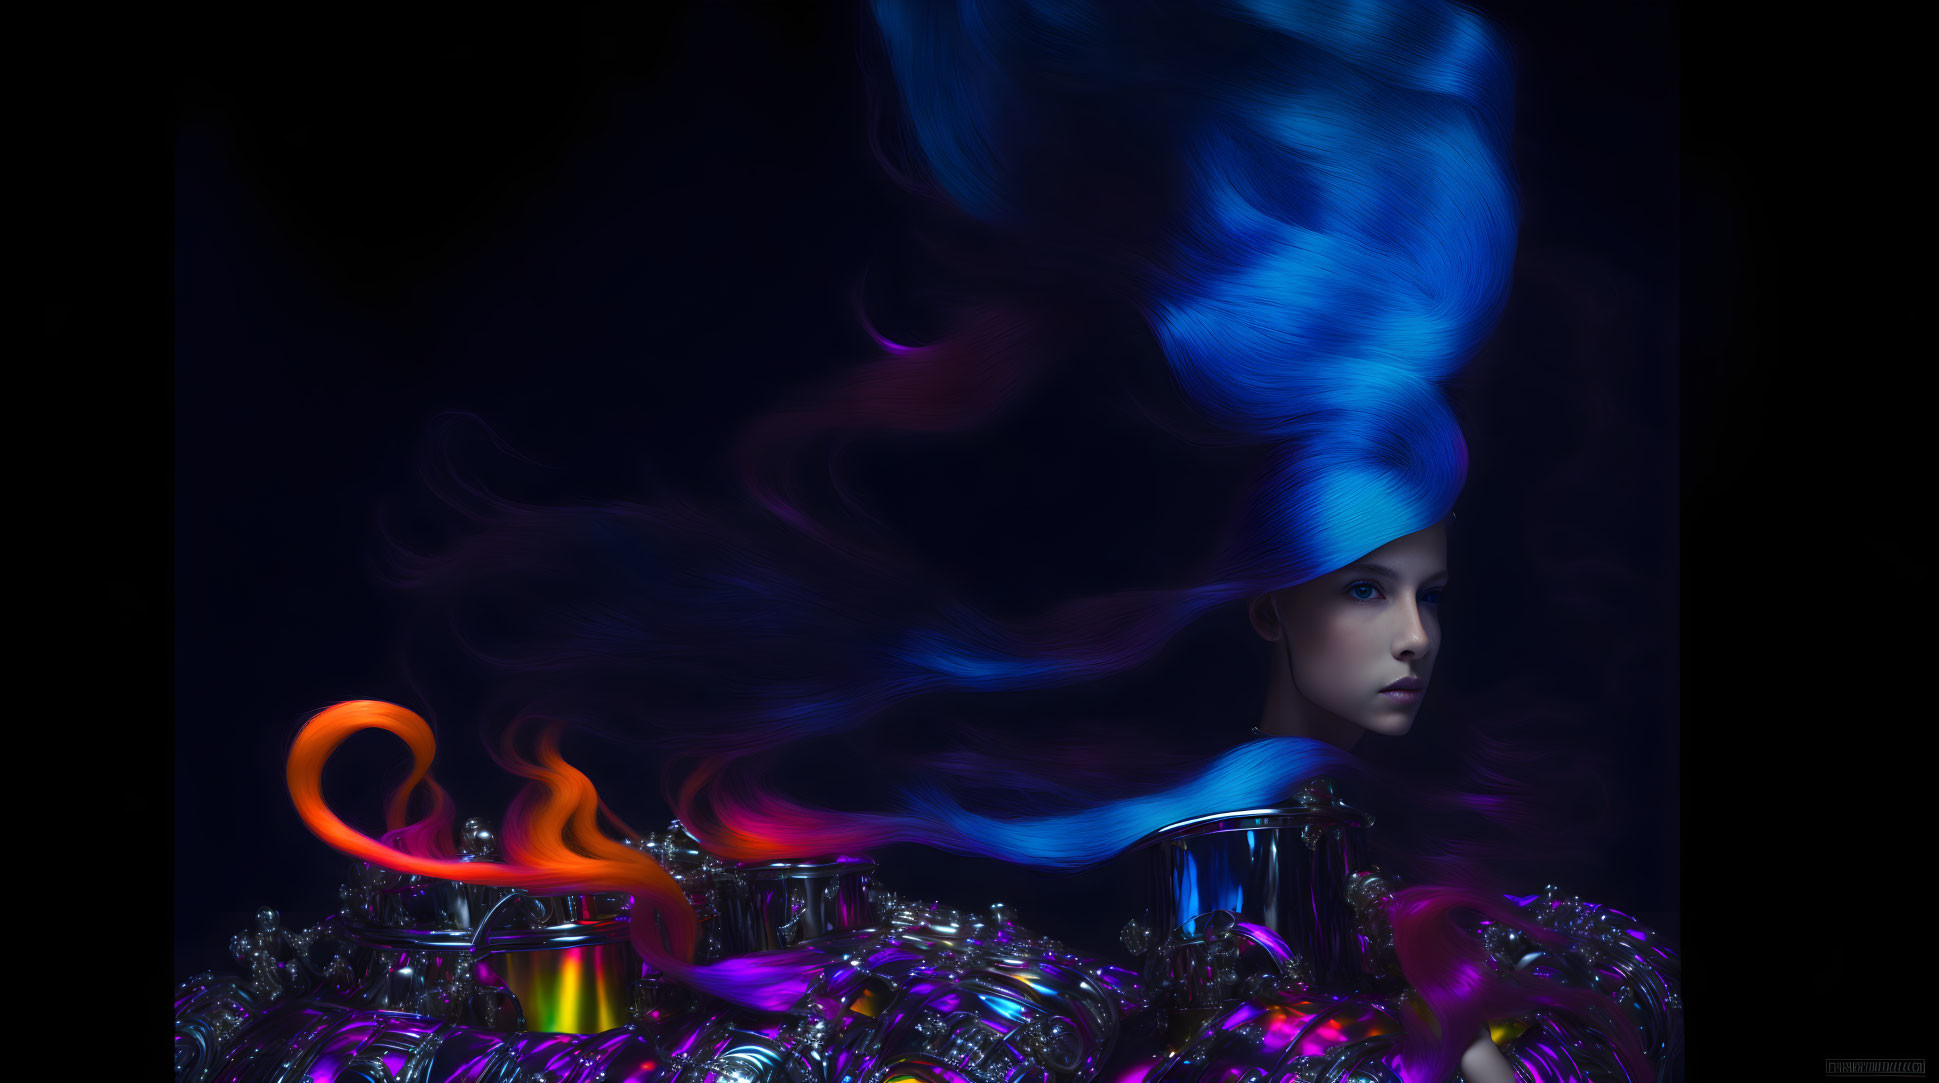 Surreal artistic image of woman's profile merging with colorful smoke over paint cans on coils